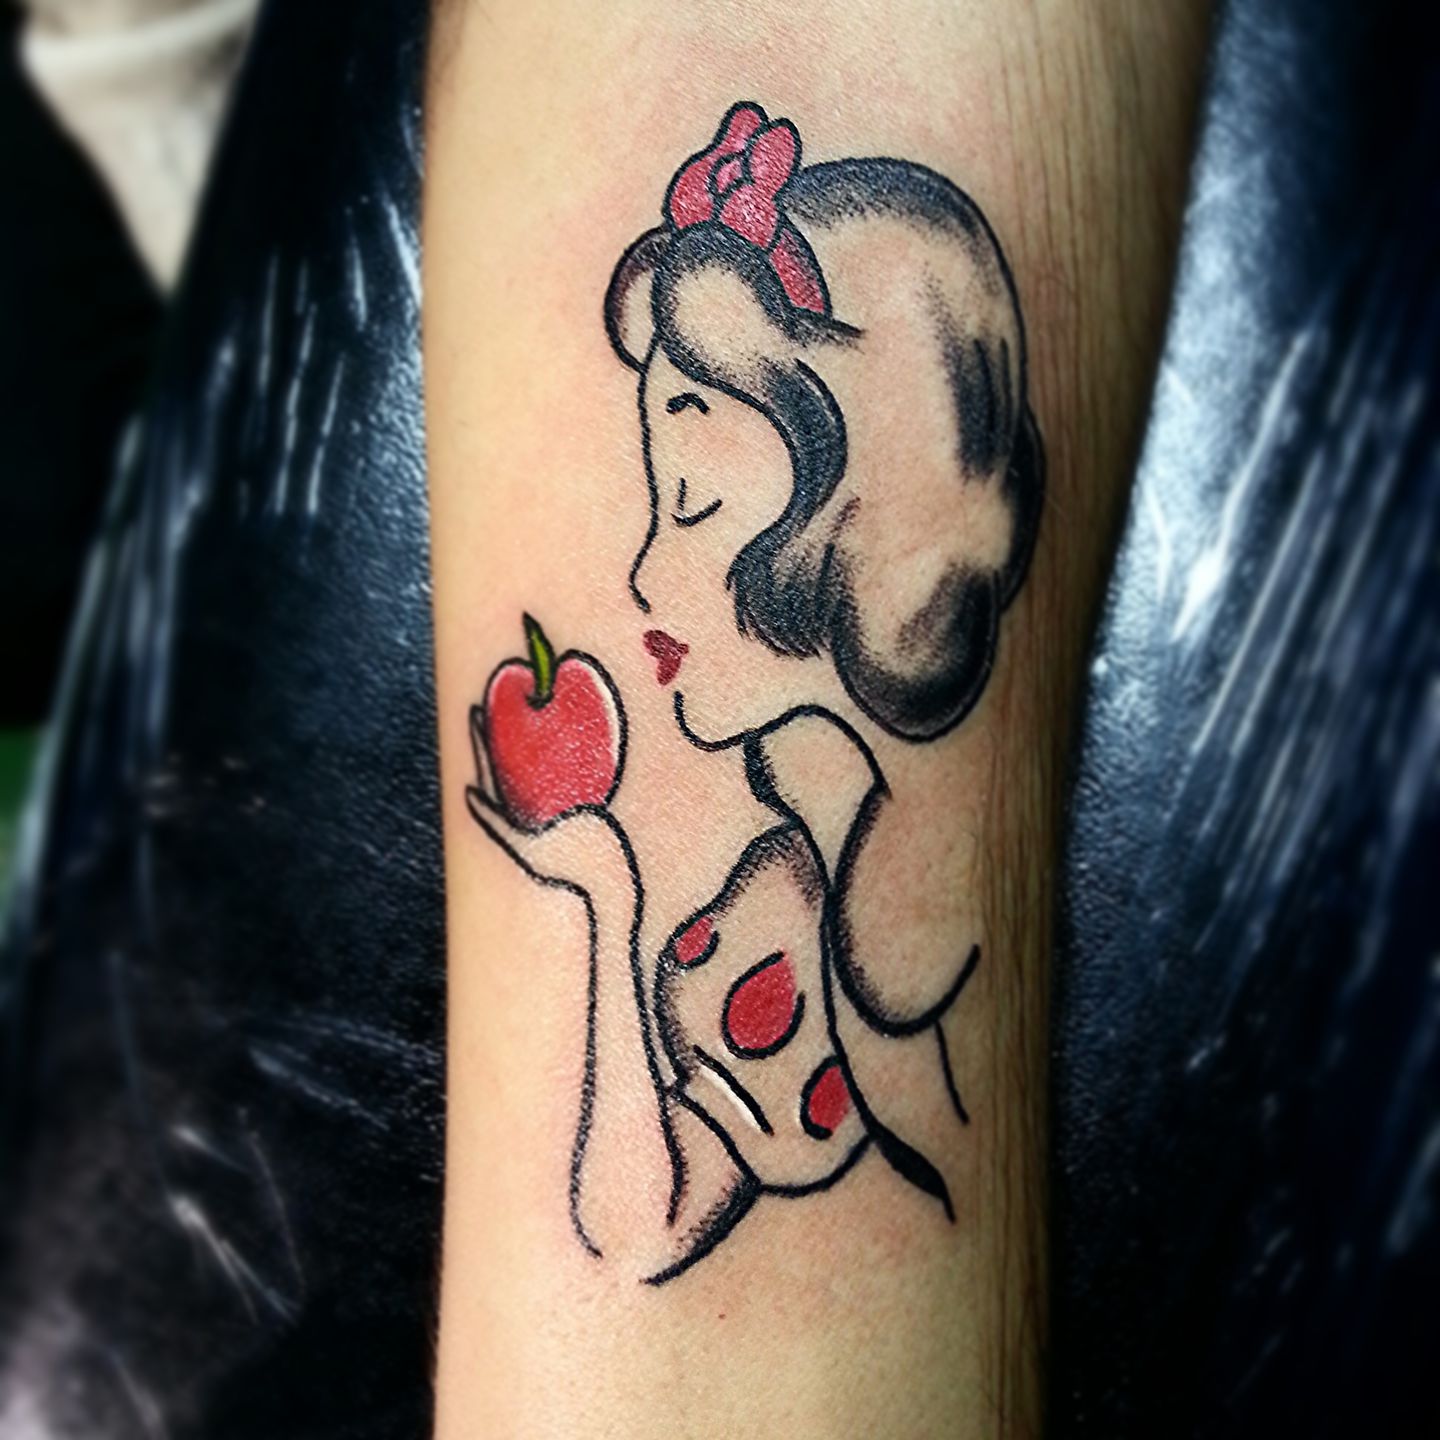 Snow White and the Evil Queen tattoo - poison apple tattoo - Disney tattoos  | Apple tattoo, Disney tattoos, Queen tattoo